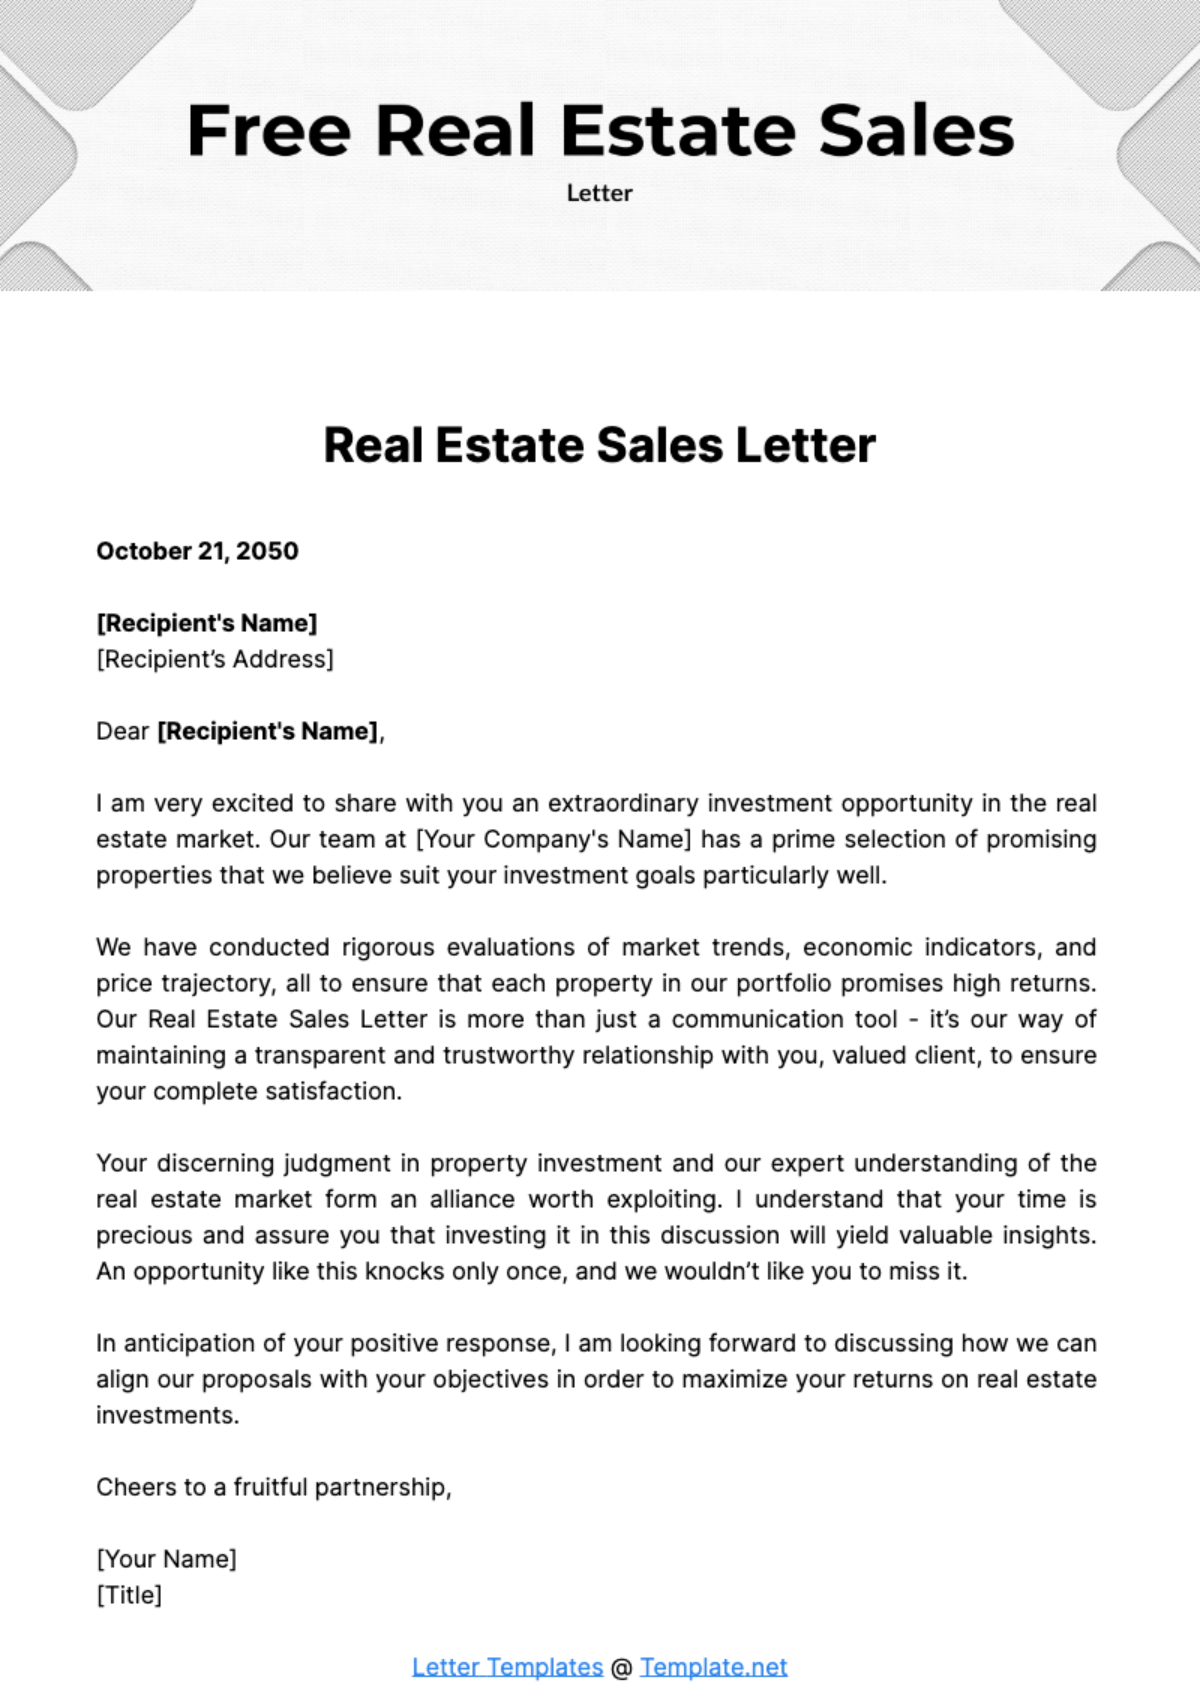 Real Estate Sales Letter Template